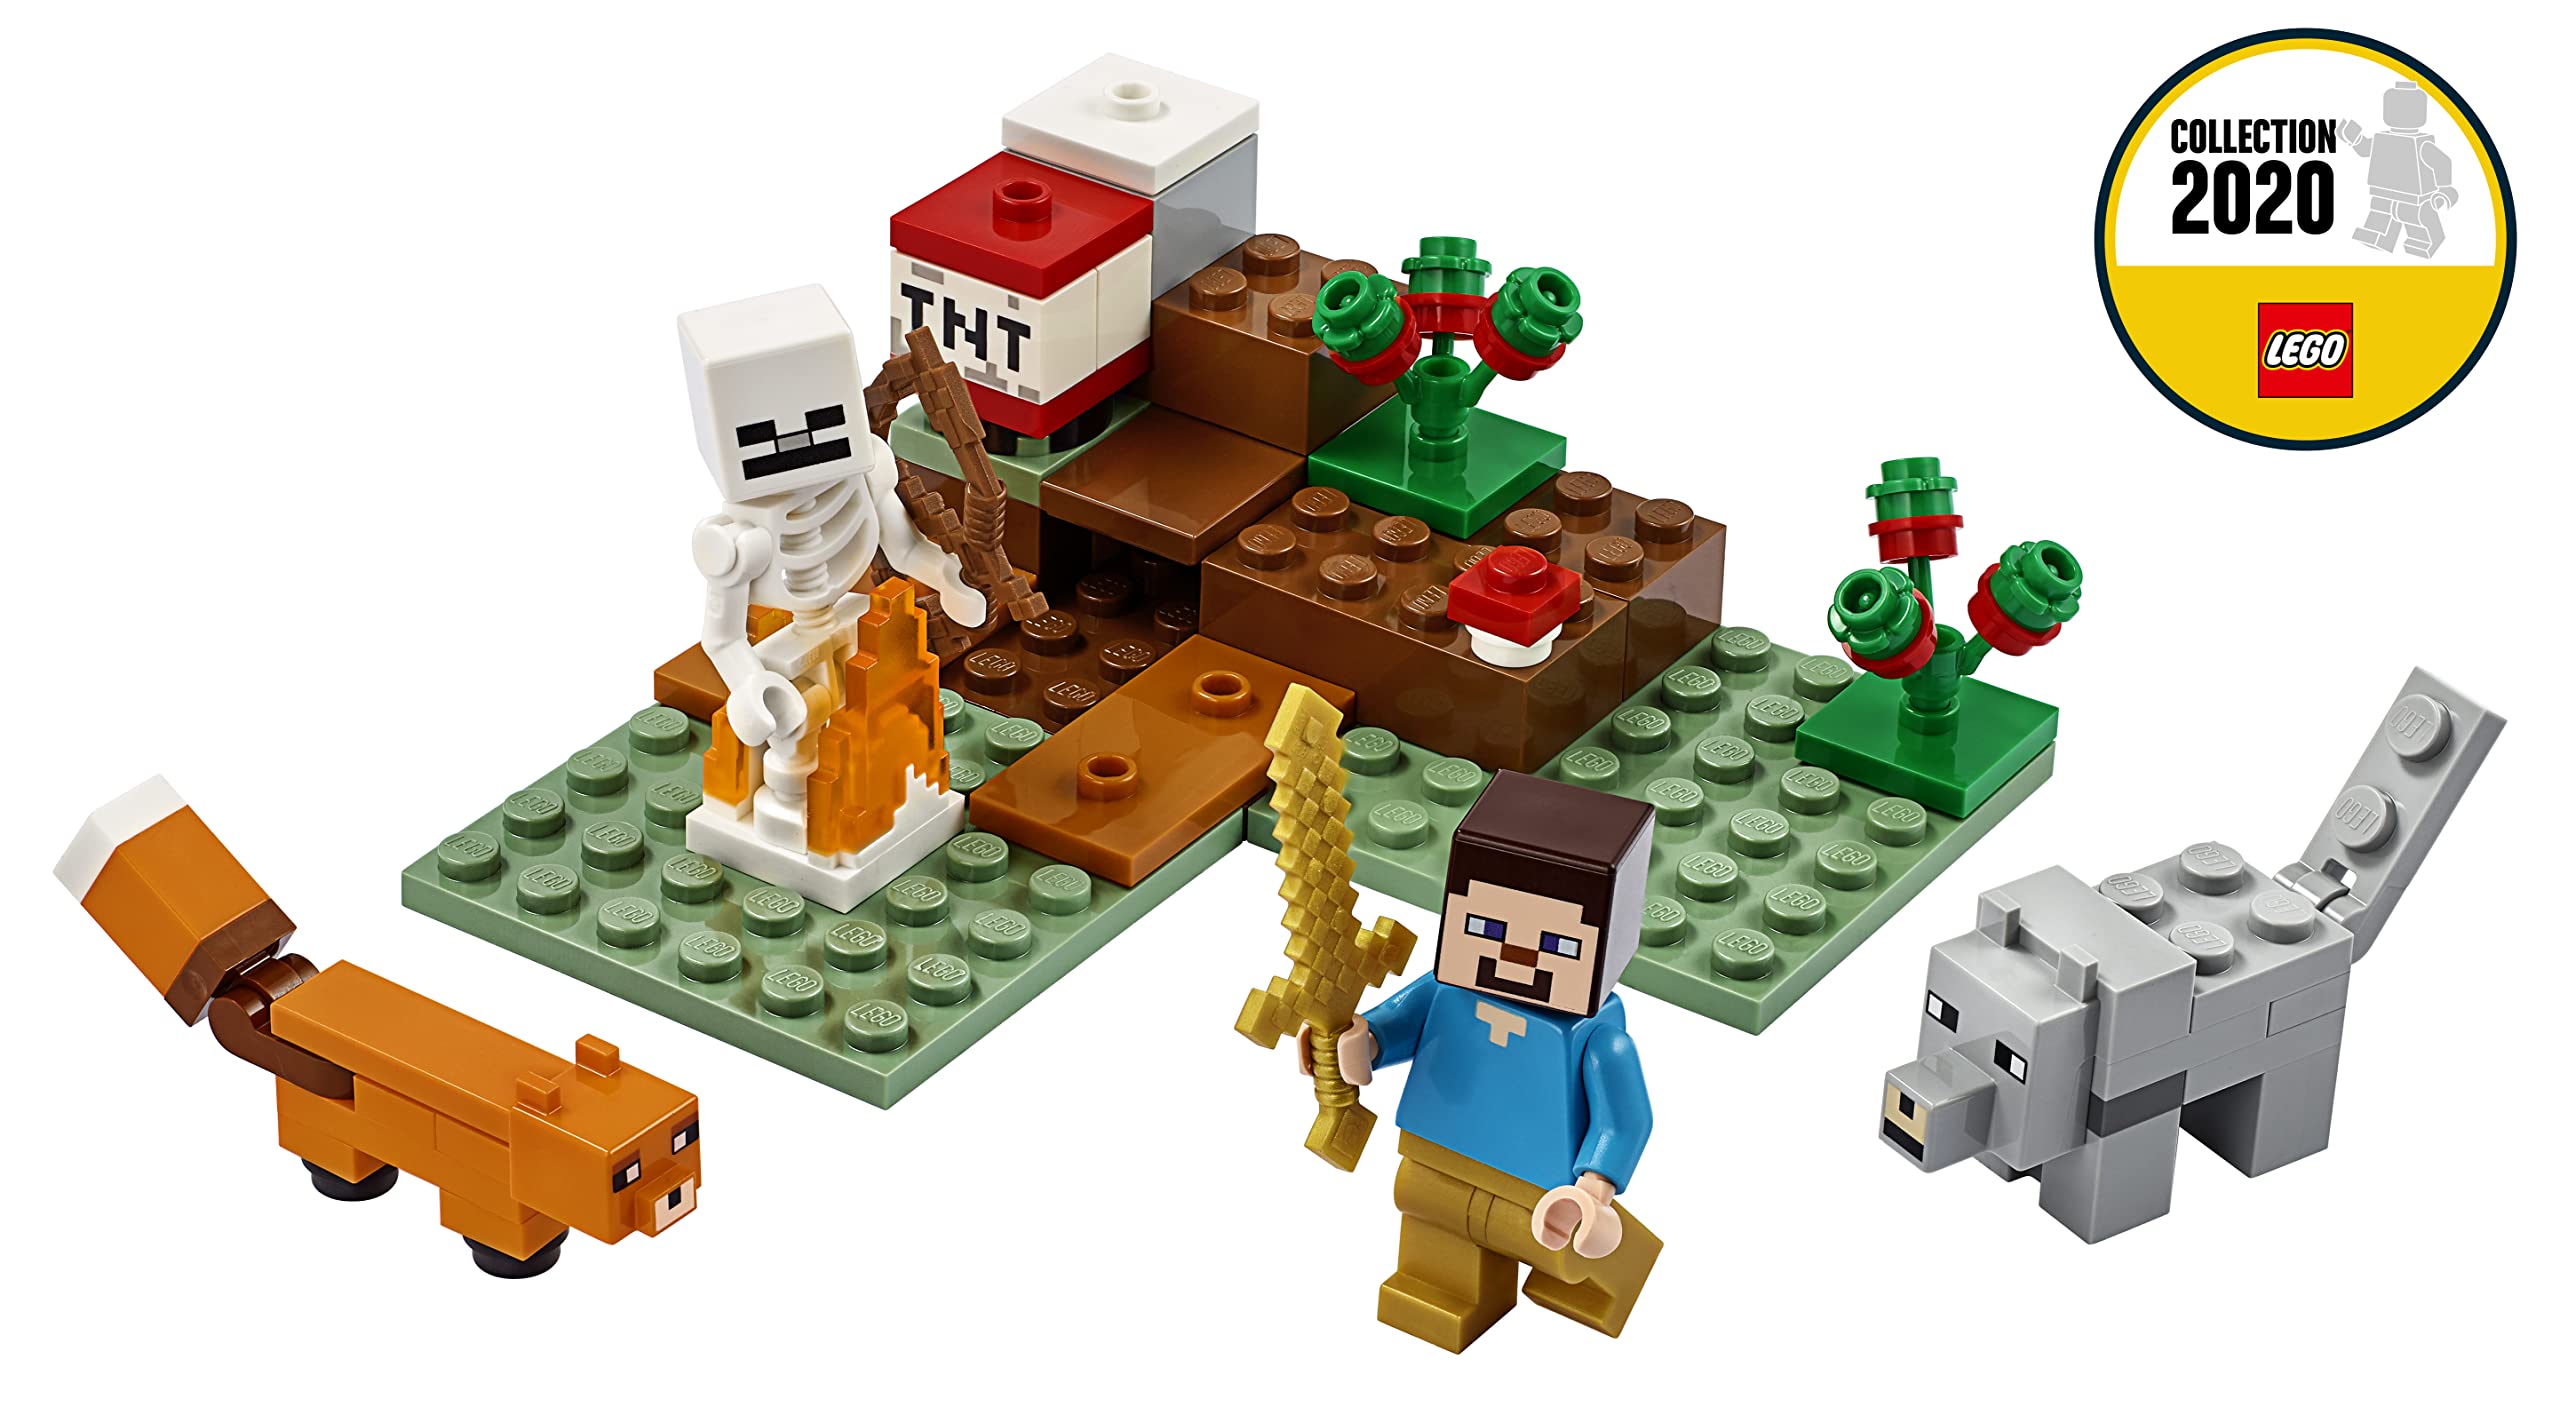 LEGO 21162 Minecraft The Taiga Adventure Building Set with Steve, Wolf and Fox Figures, Toys for Kids for 7+ Years Old